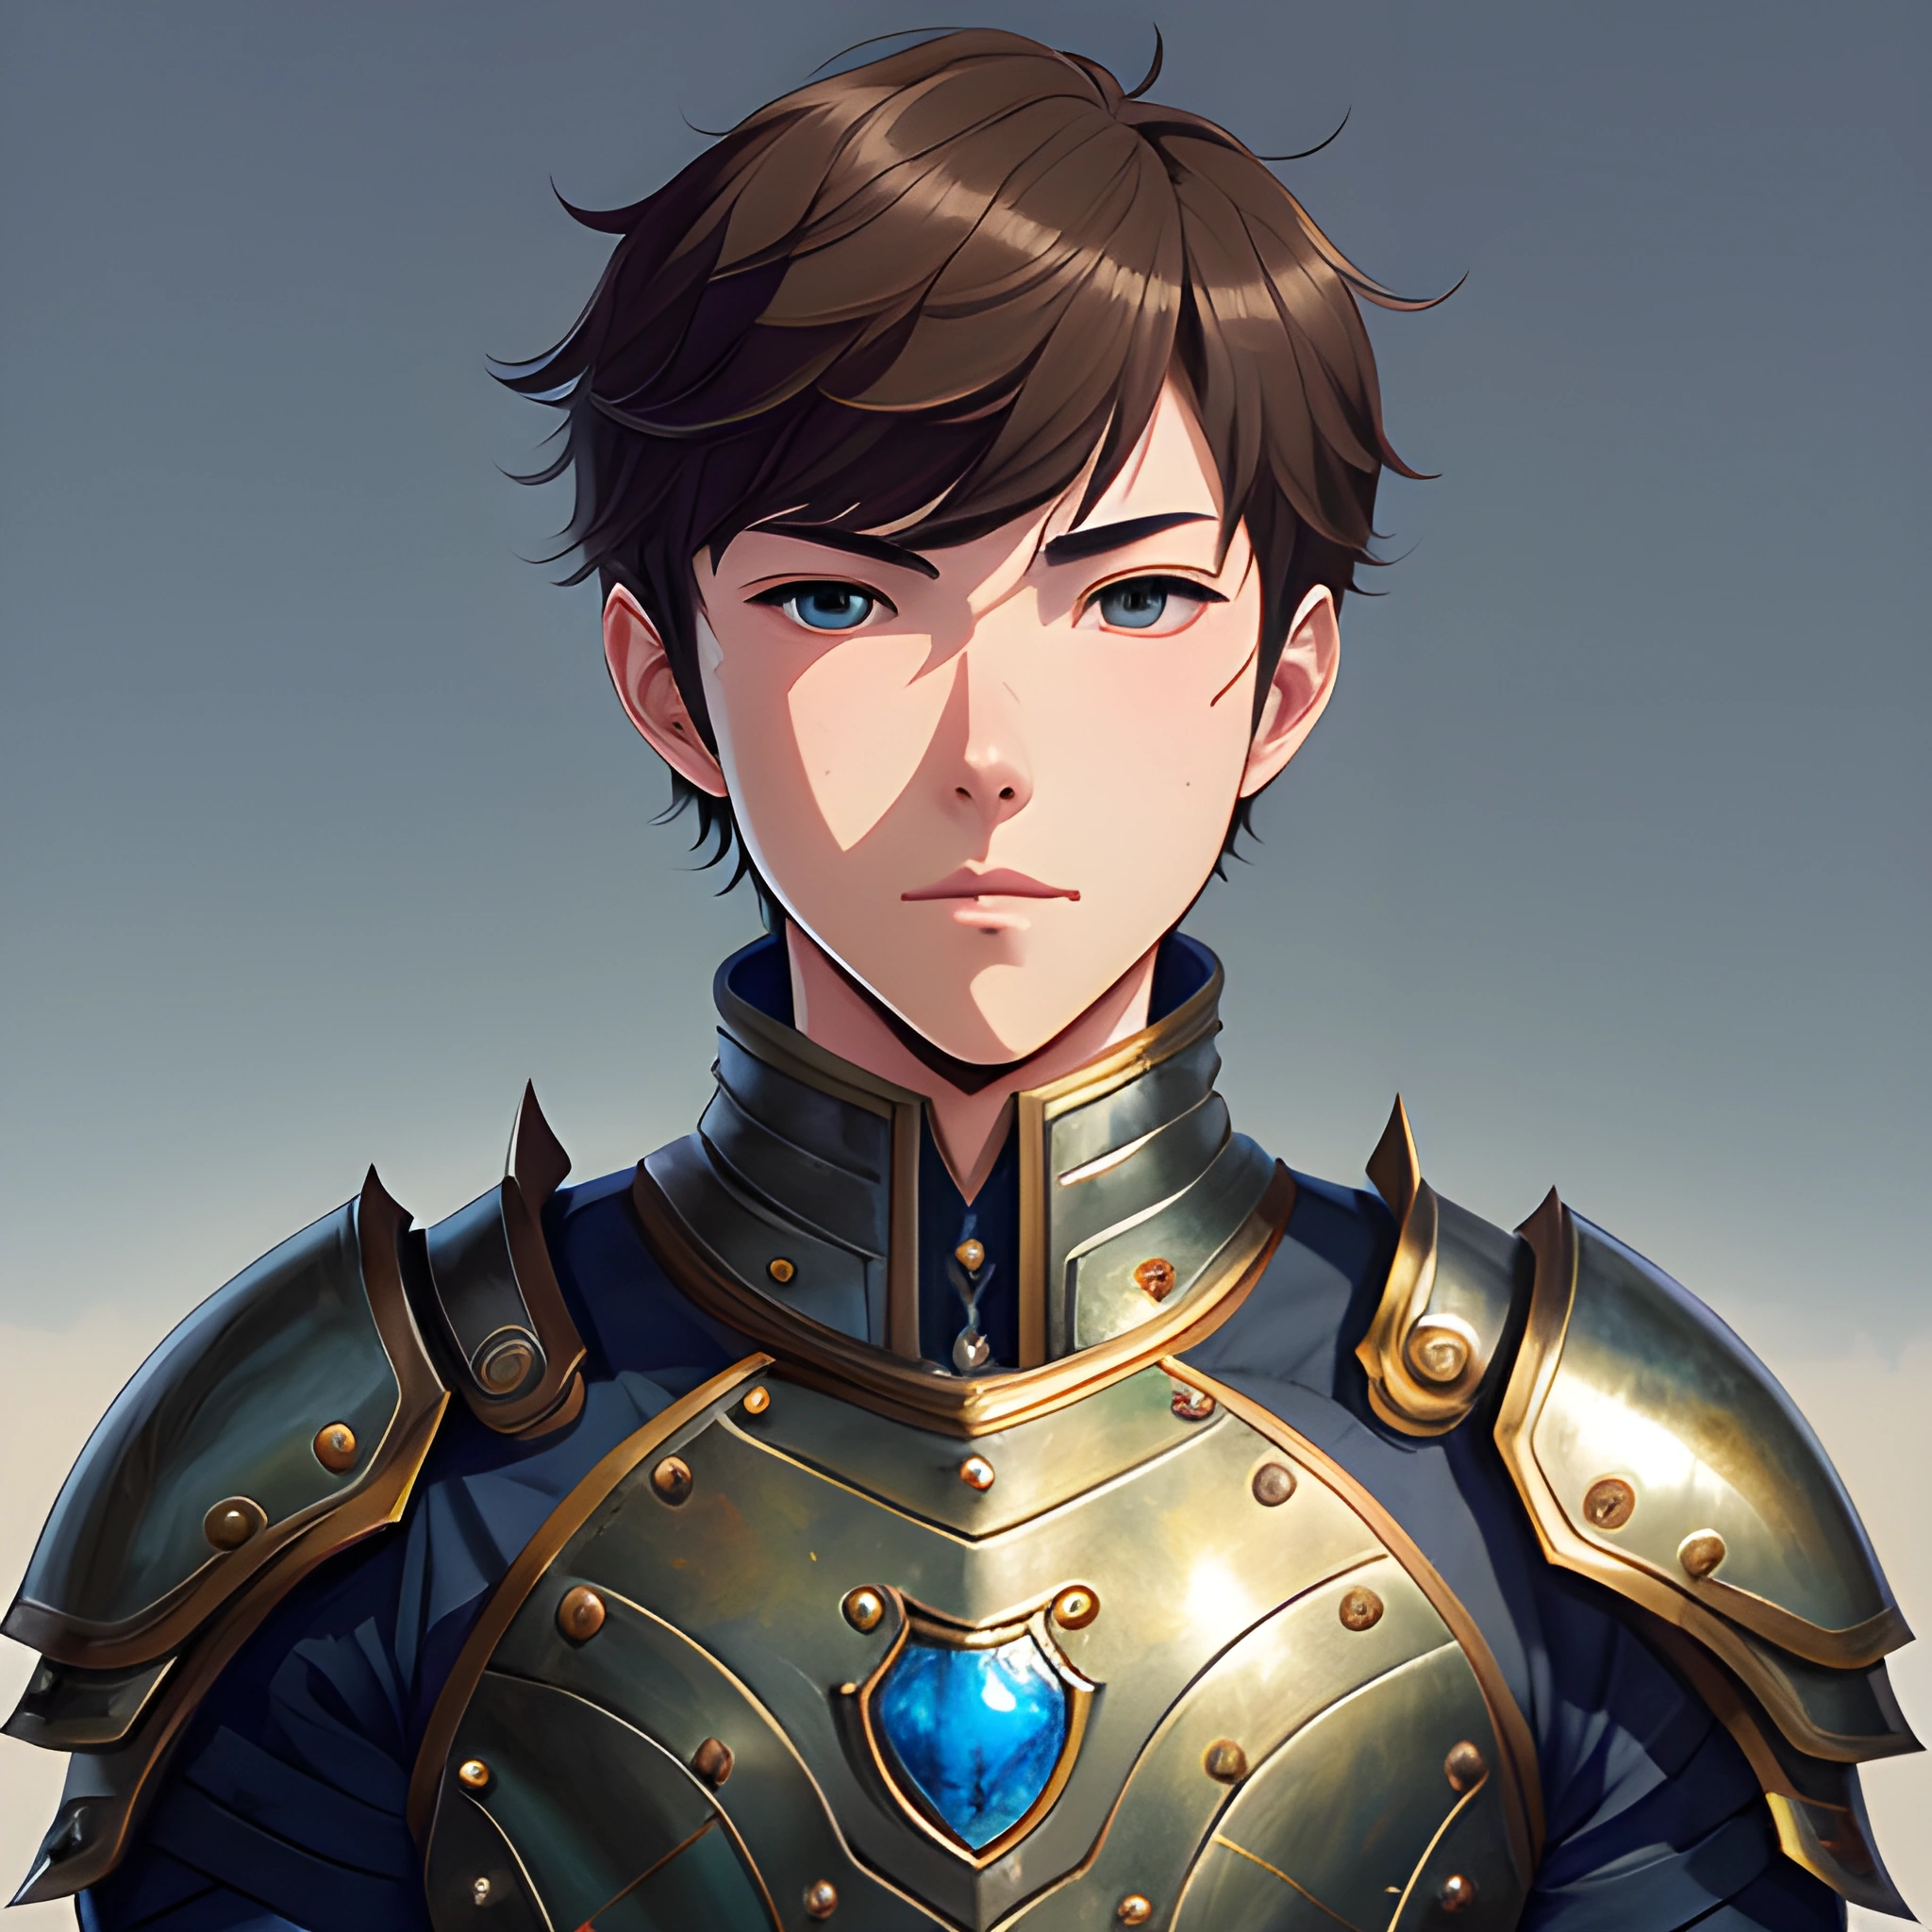 anime character with a blue eye and a gold armor